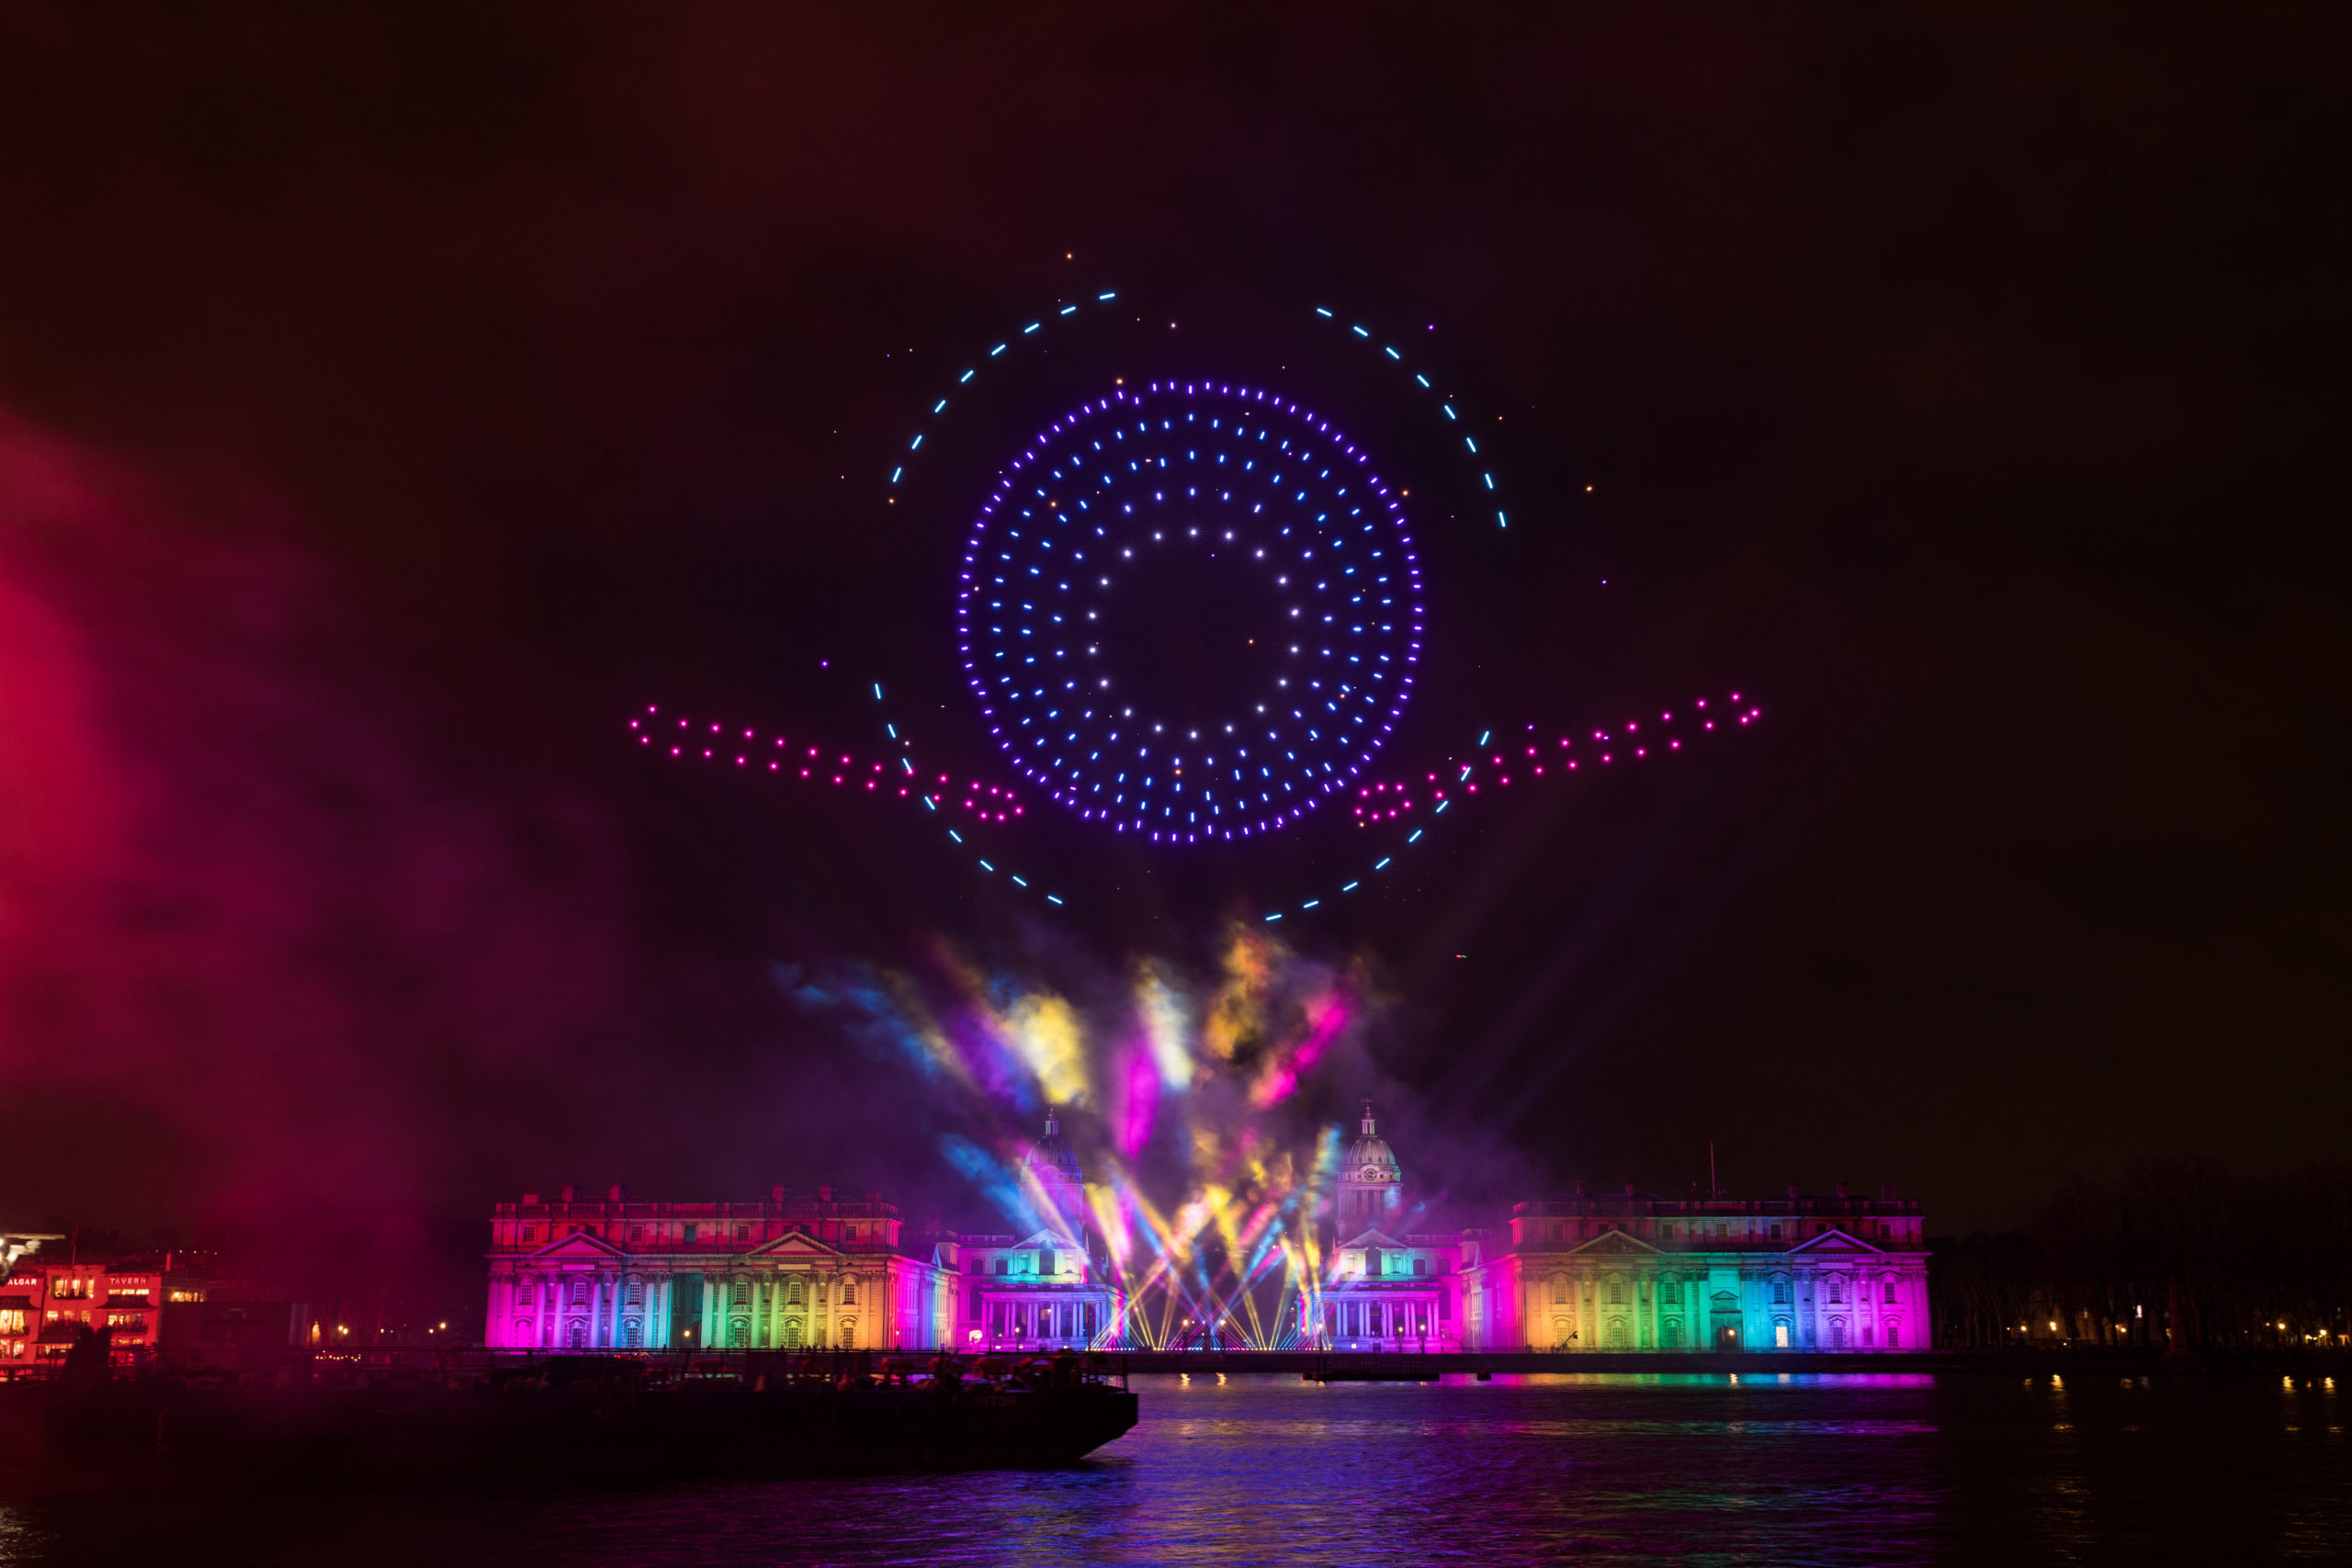 London ushers in 2022 with innovative broadcast performance